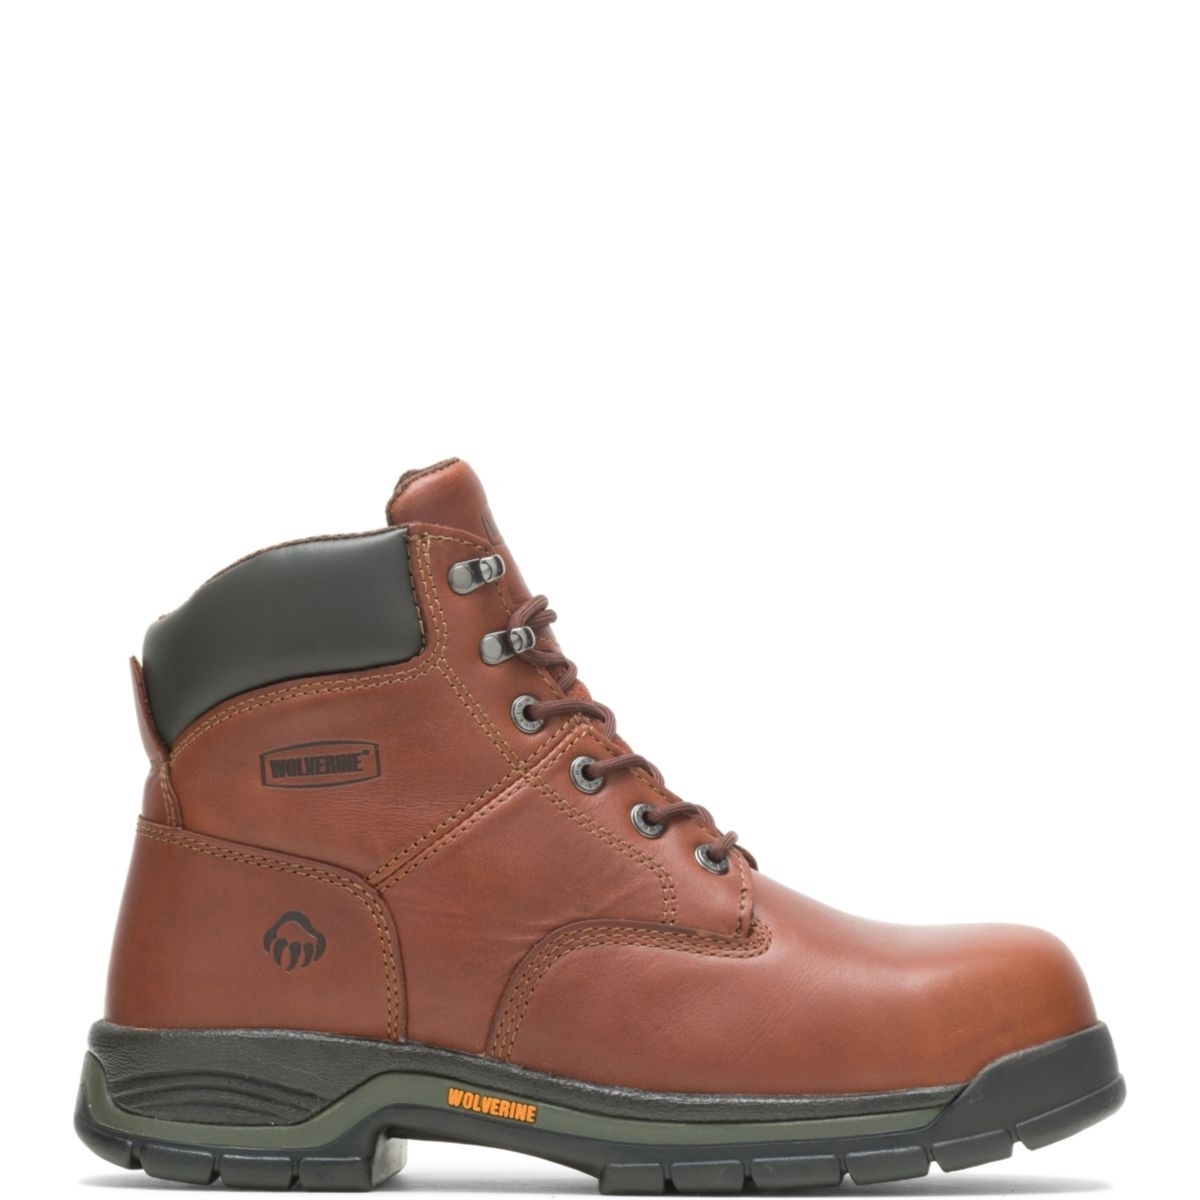 WOLVERINE Men's Harrison 6 Lace-Up Steel Toe Work Boot Brown - W04904 BROWN LEATHER - BROWN LEATHER, 10.5-4E